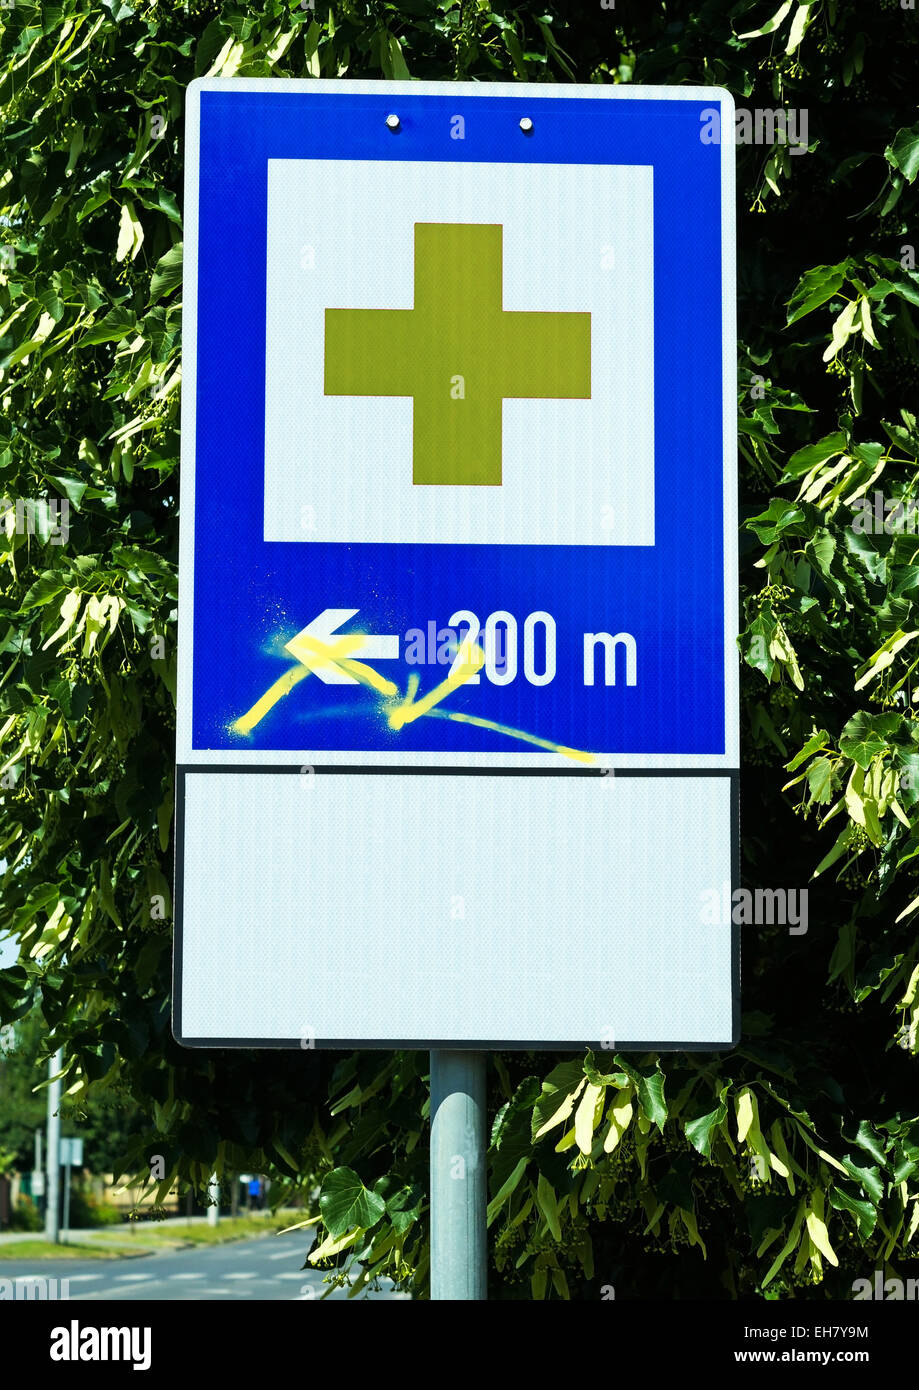 Hospital traffic sign next to the street in the city Stock Photo